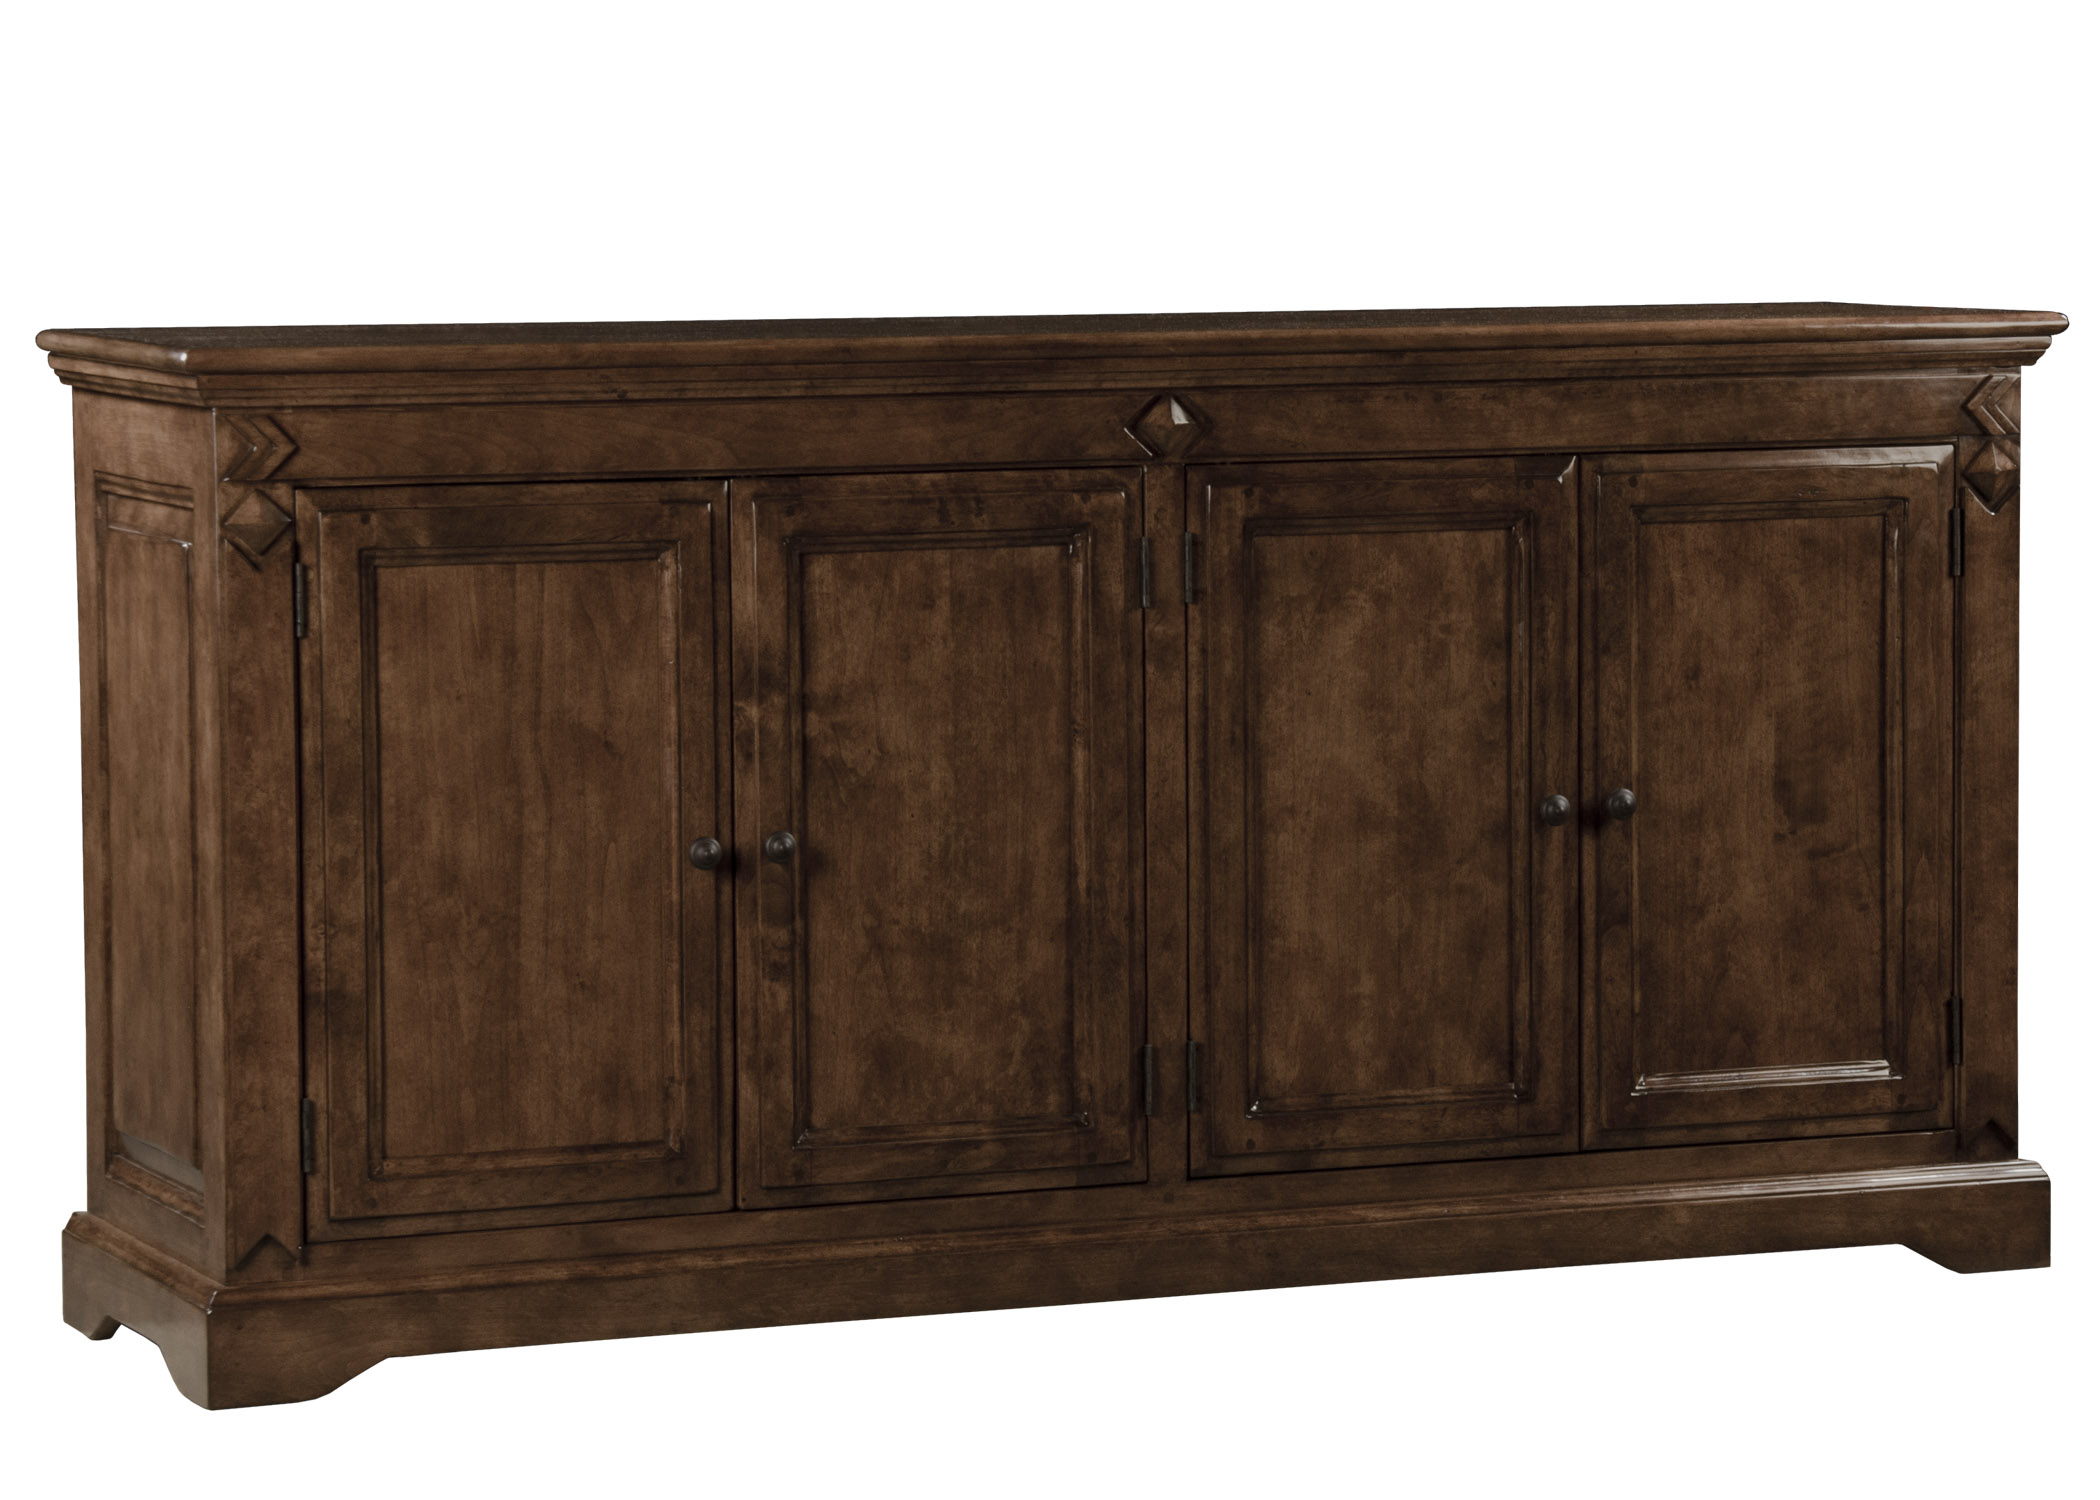 Fraser transitional buffet cabinet by Woodland furniture in Idaho Falls